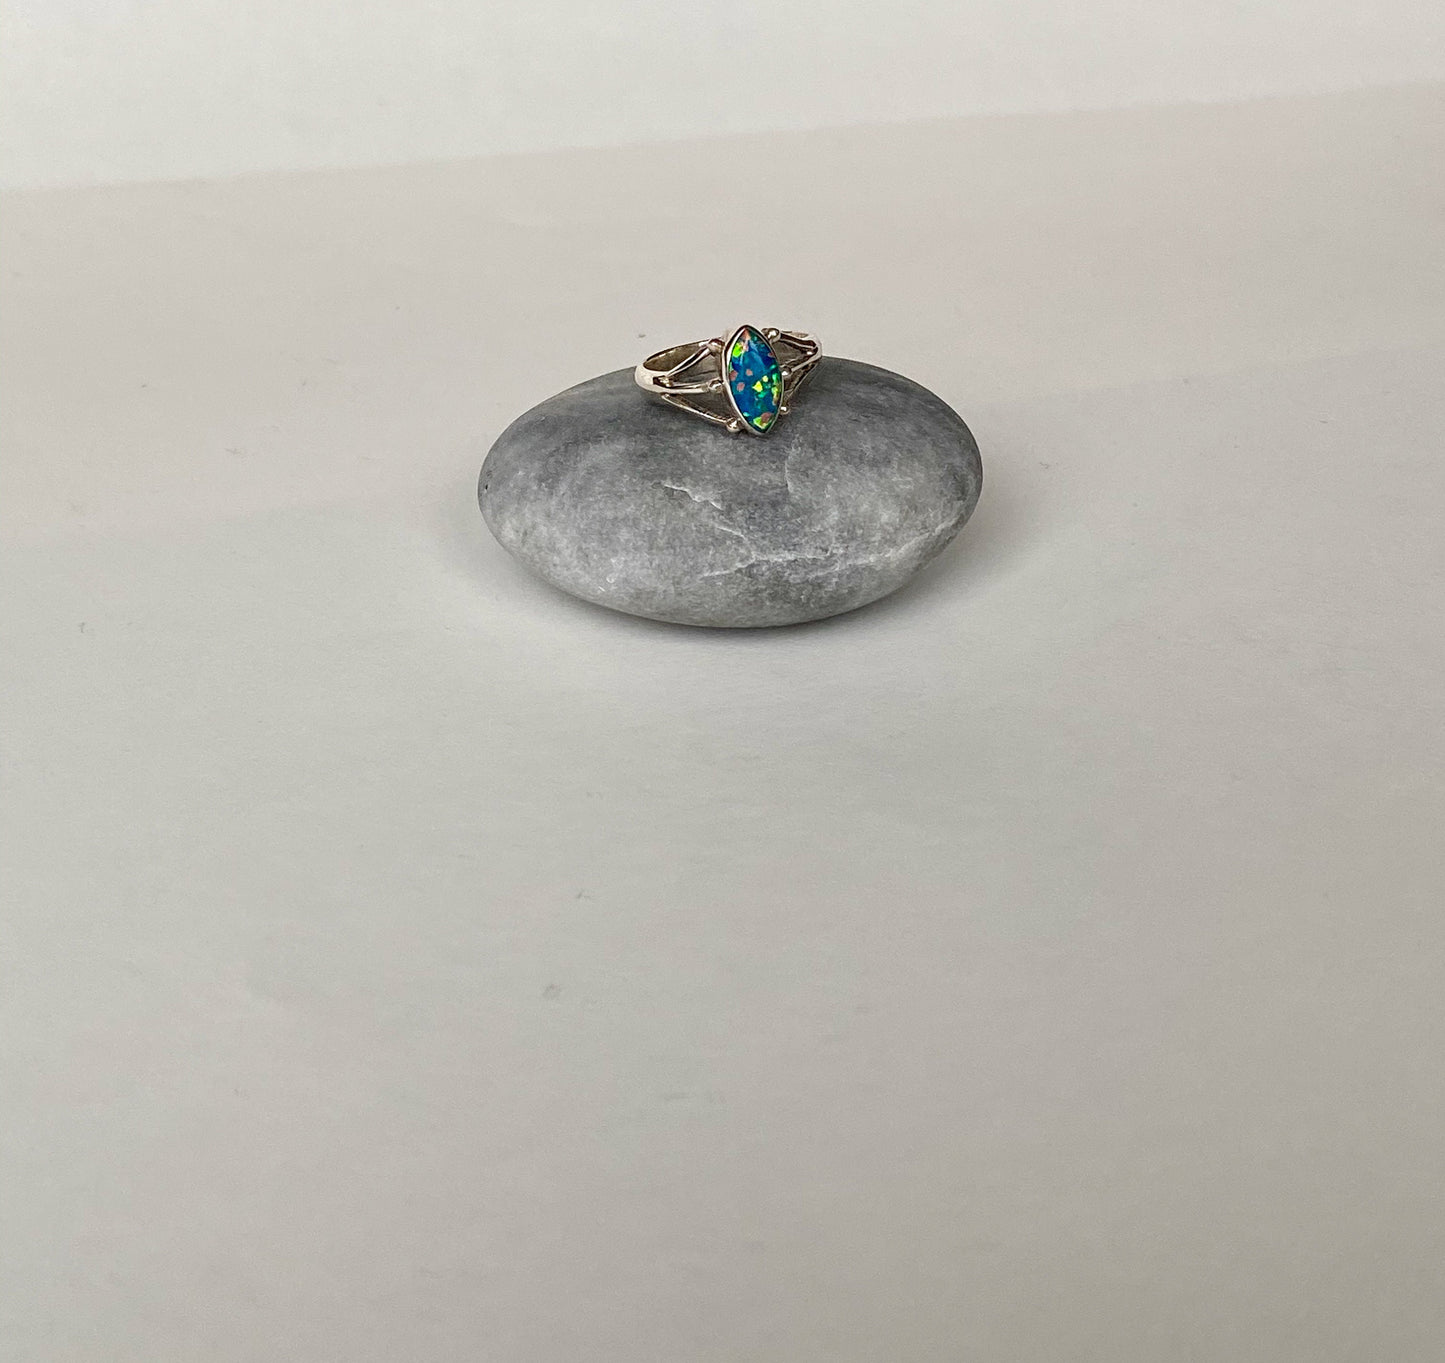 Beautiful size 5 3/4" blue fire opal and sterling silver ring.